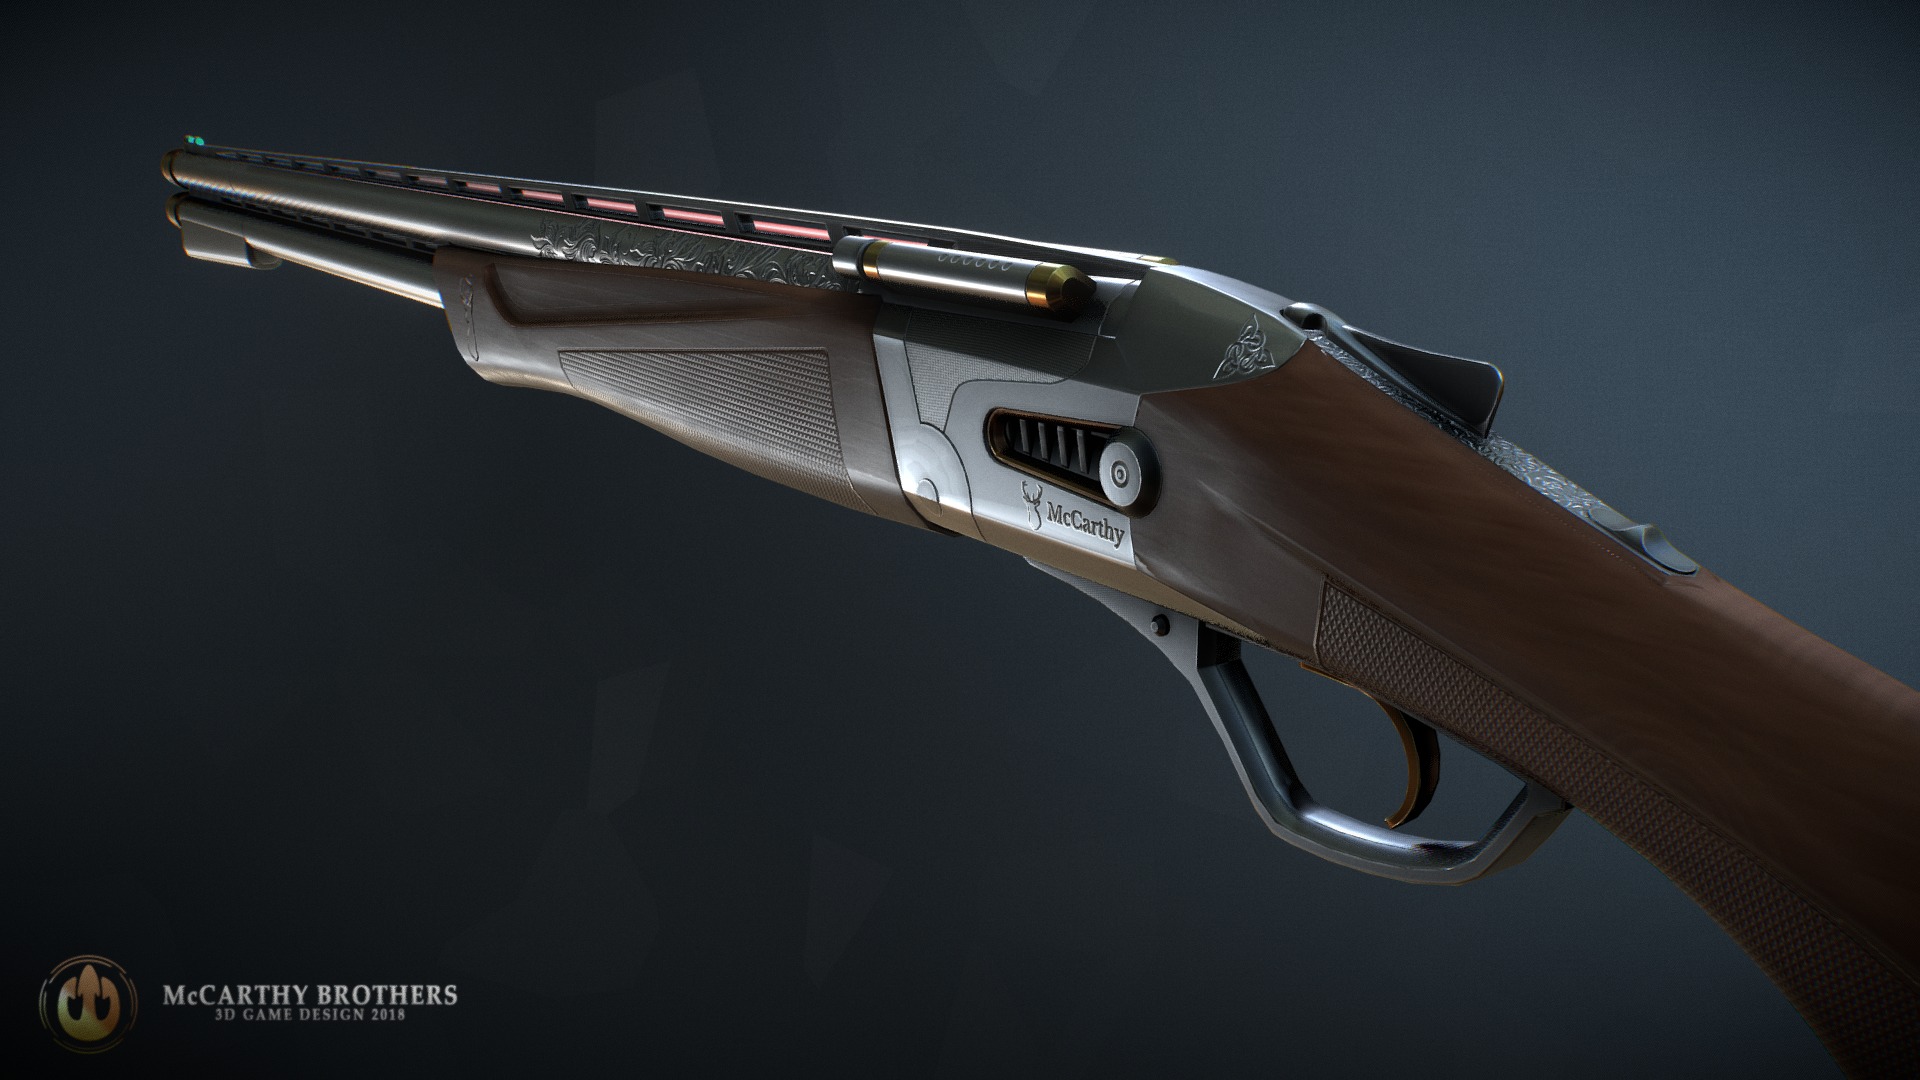 3D model Heritage Plasma Shotgun - This is a 3D model of the Heritage Plasma Shotgun. The 3D model is about a silver and black gun.